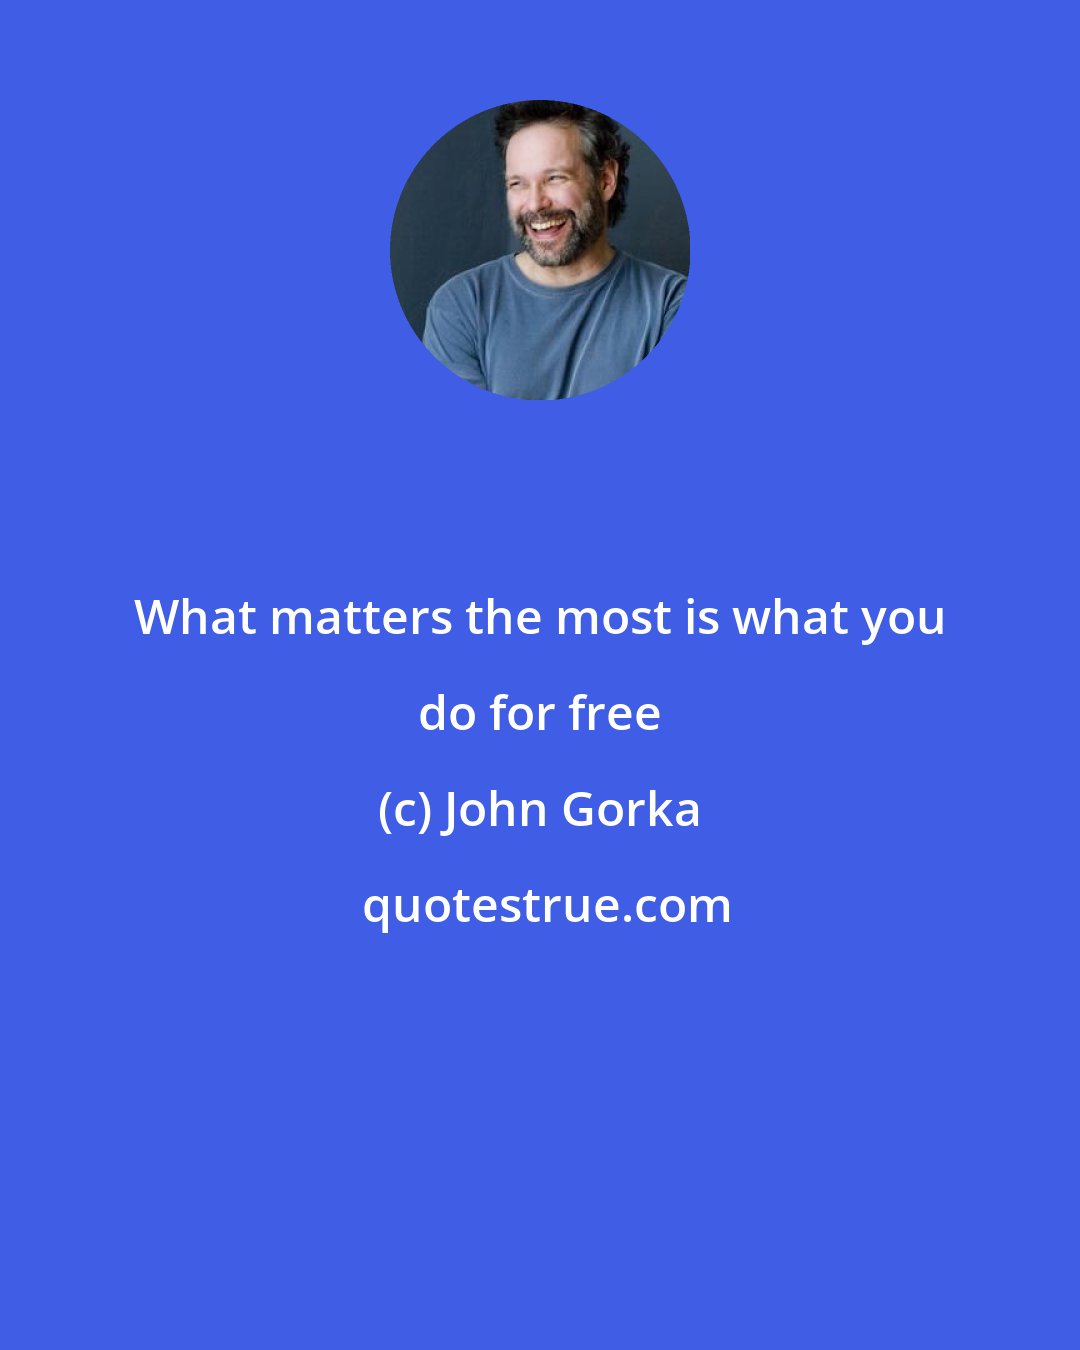 John Gorka: What matters the most is what you do for free